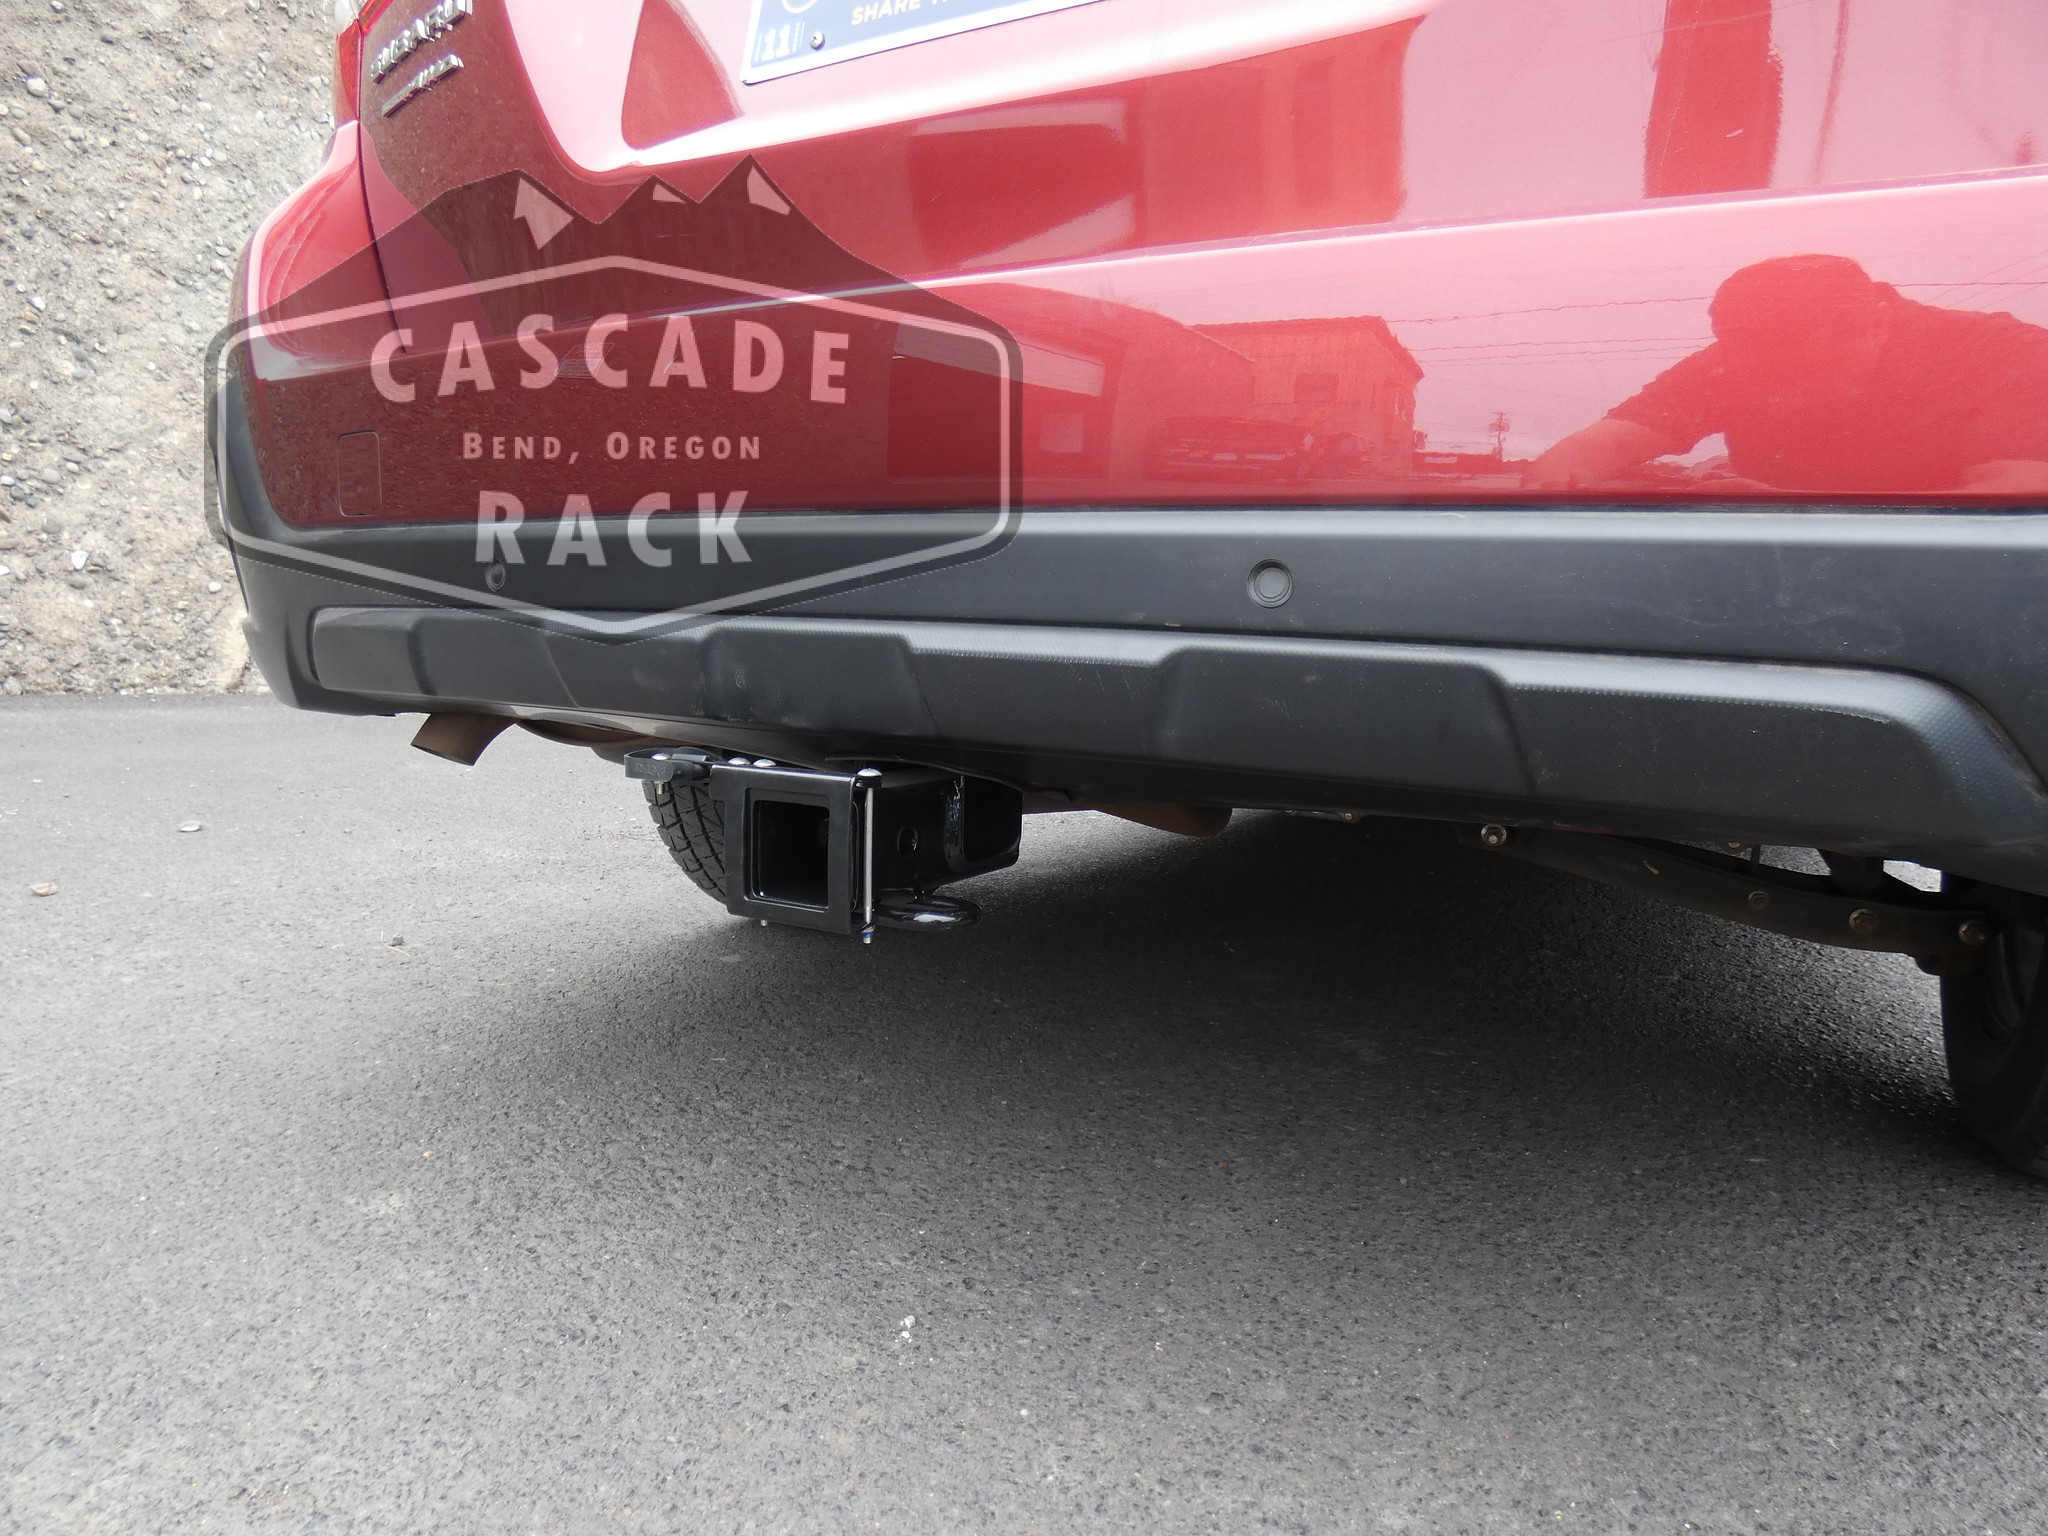 2019 Subaru Outback - Receiver Hitch and Wiring - Curt